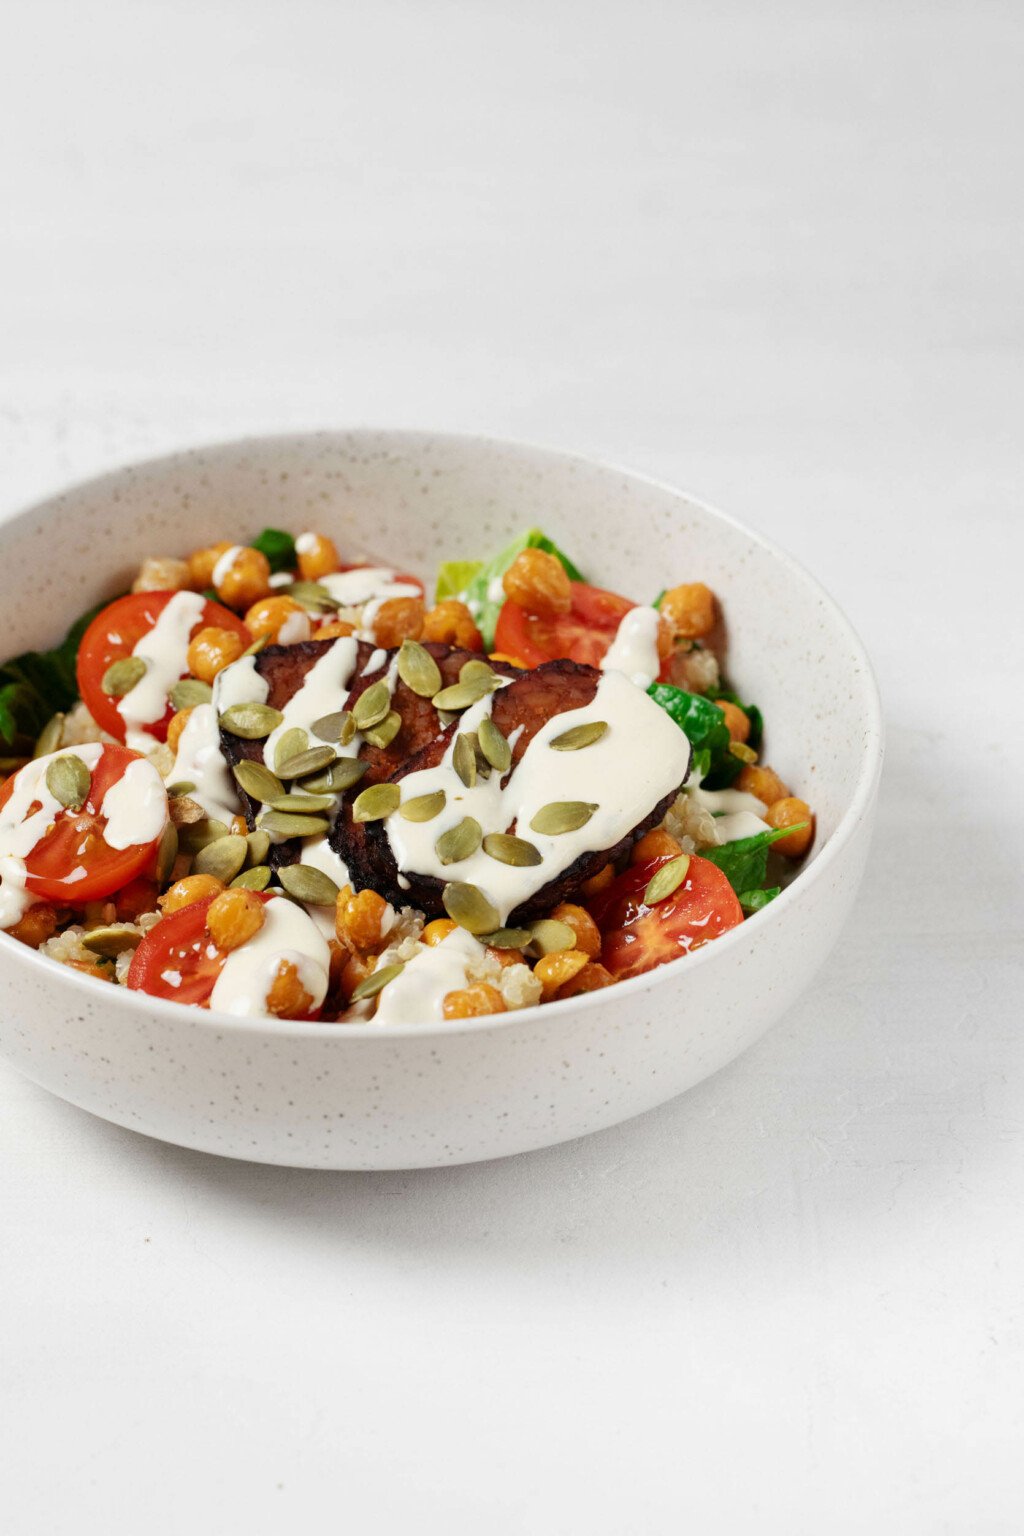 A large, white bowl is filled with vegetables, roasted chickpeas, quinoa, and a creamy ranch dressing. The bowl is topped with pepitas.